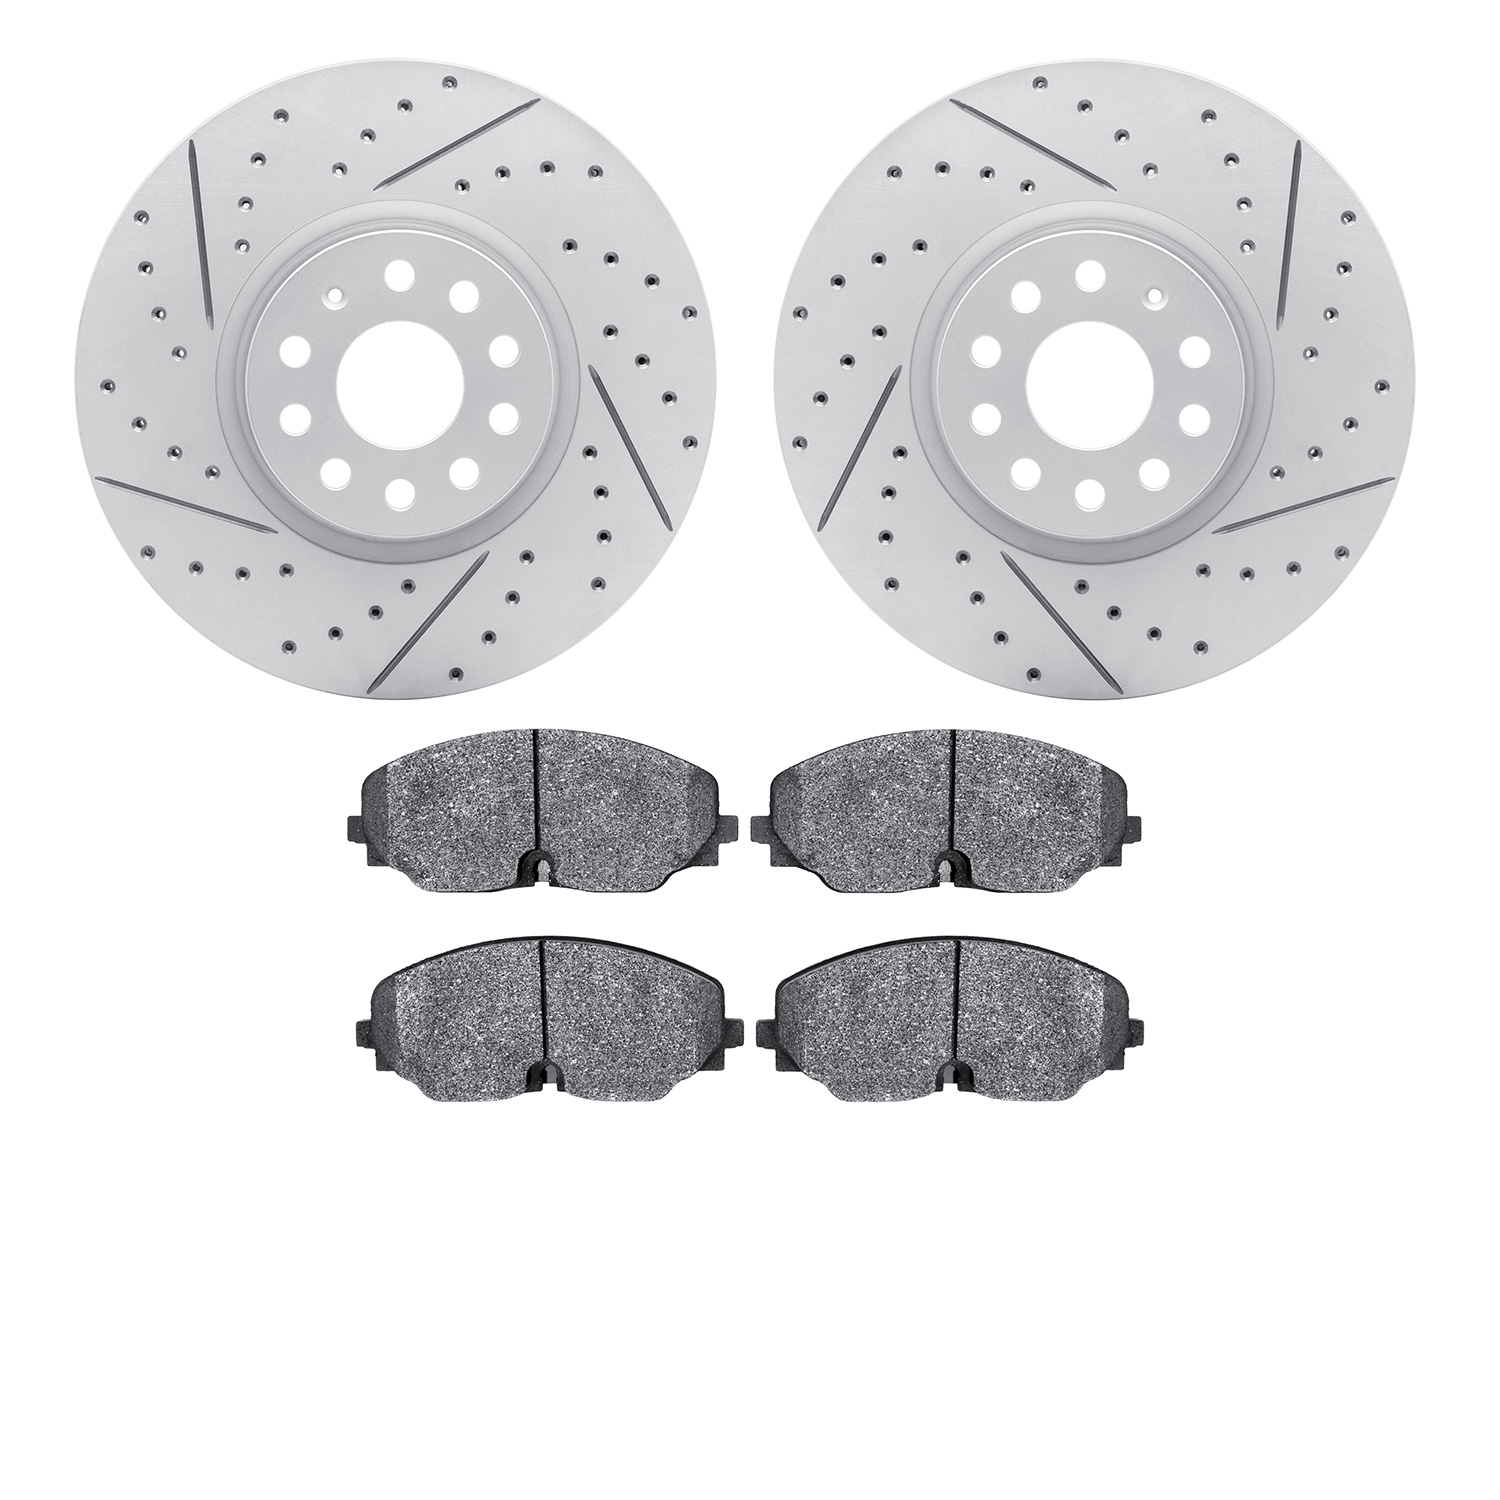 2502-74095 Geoperformance Drilled/Slotted Rotors w/5000 Advanced Brake Pads Kit, Fits Select Audi/Volkswagen, Position: Front